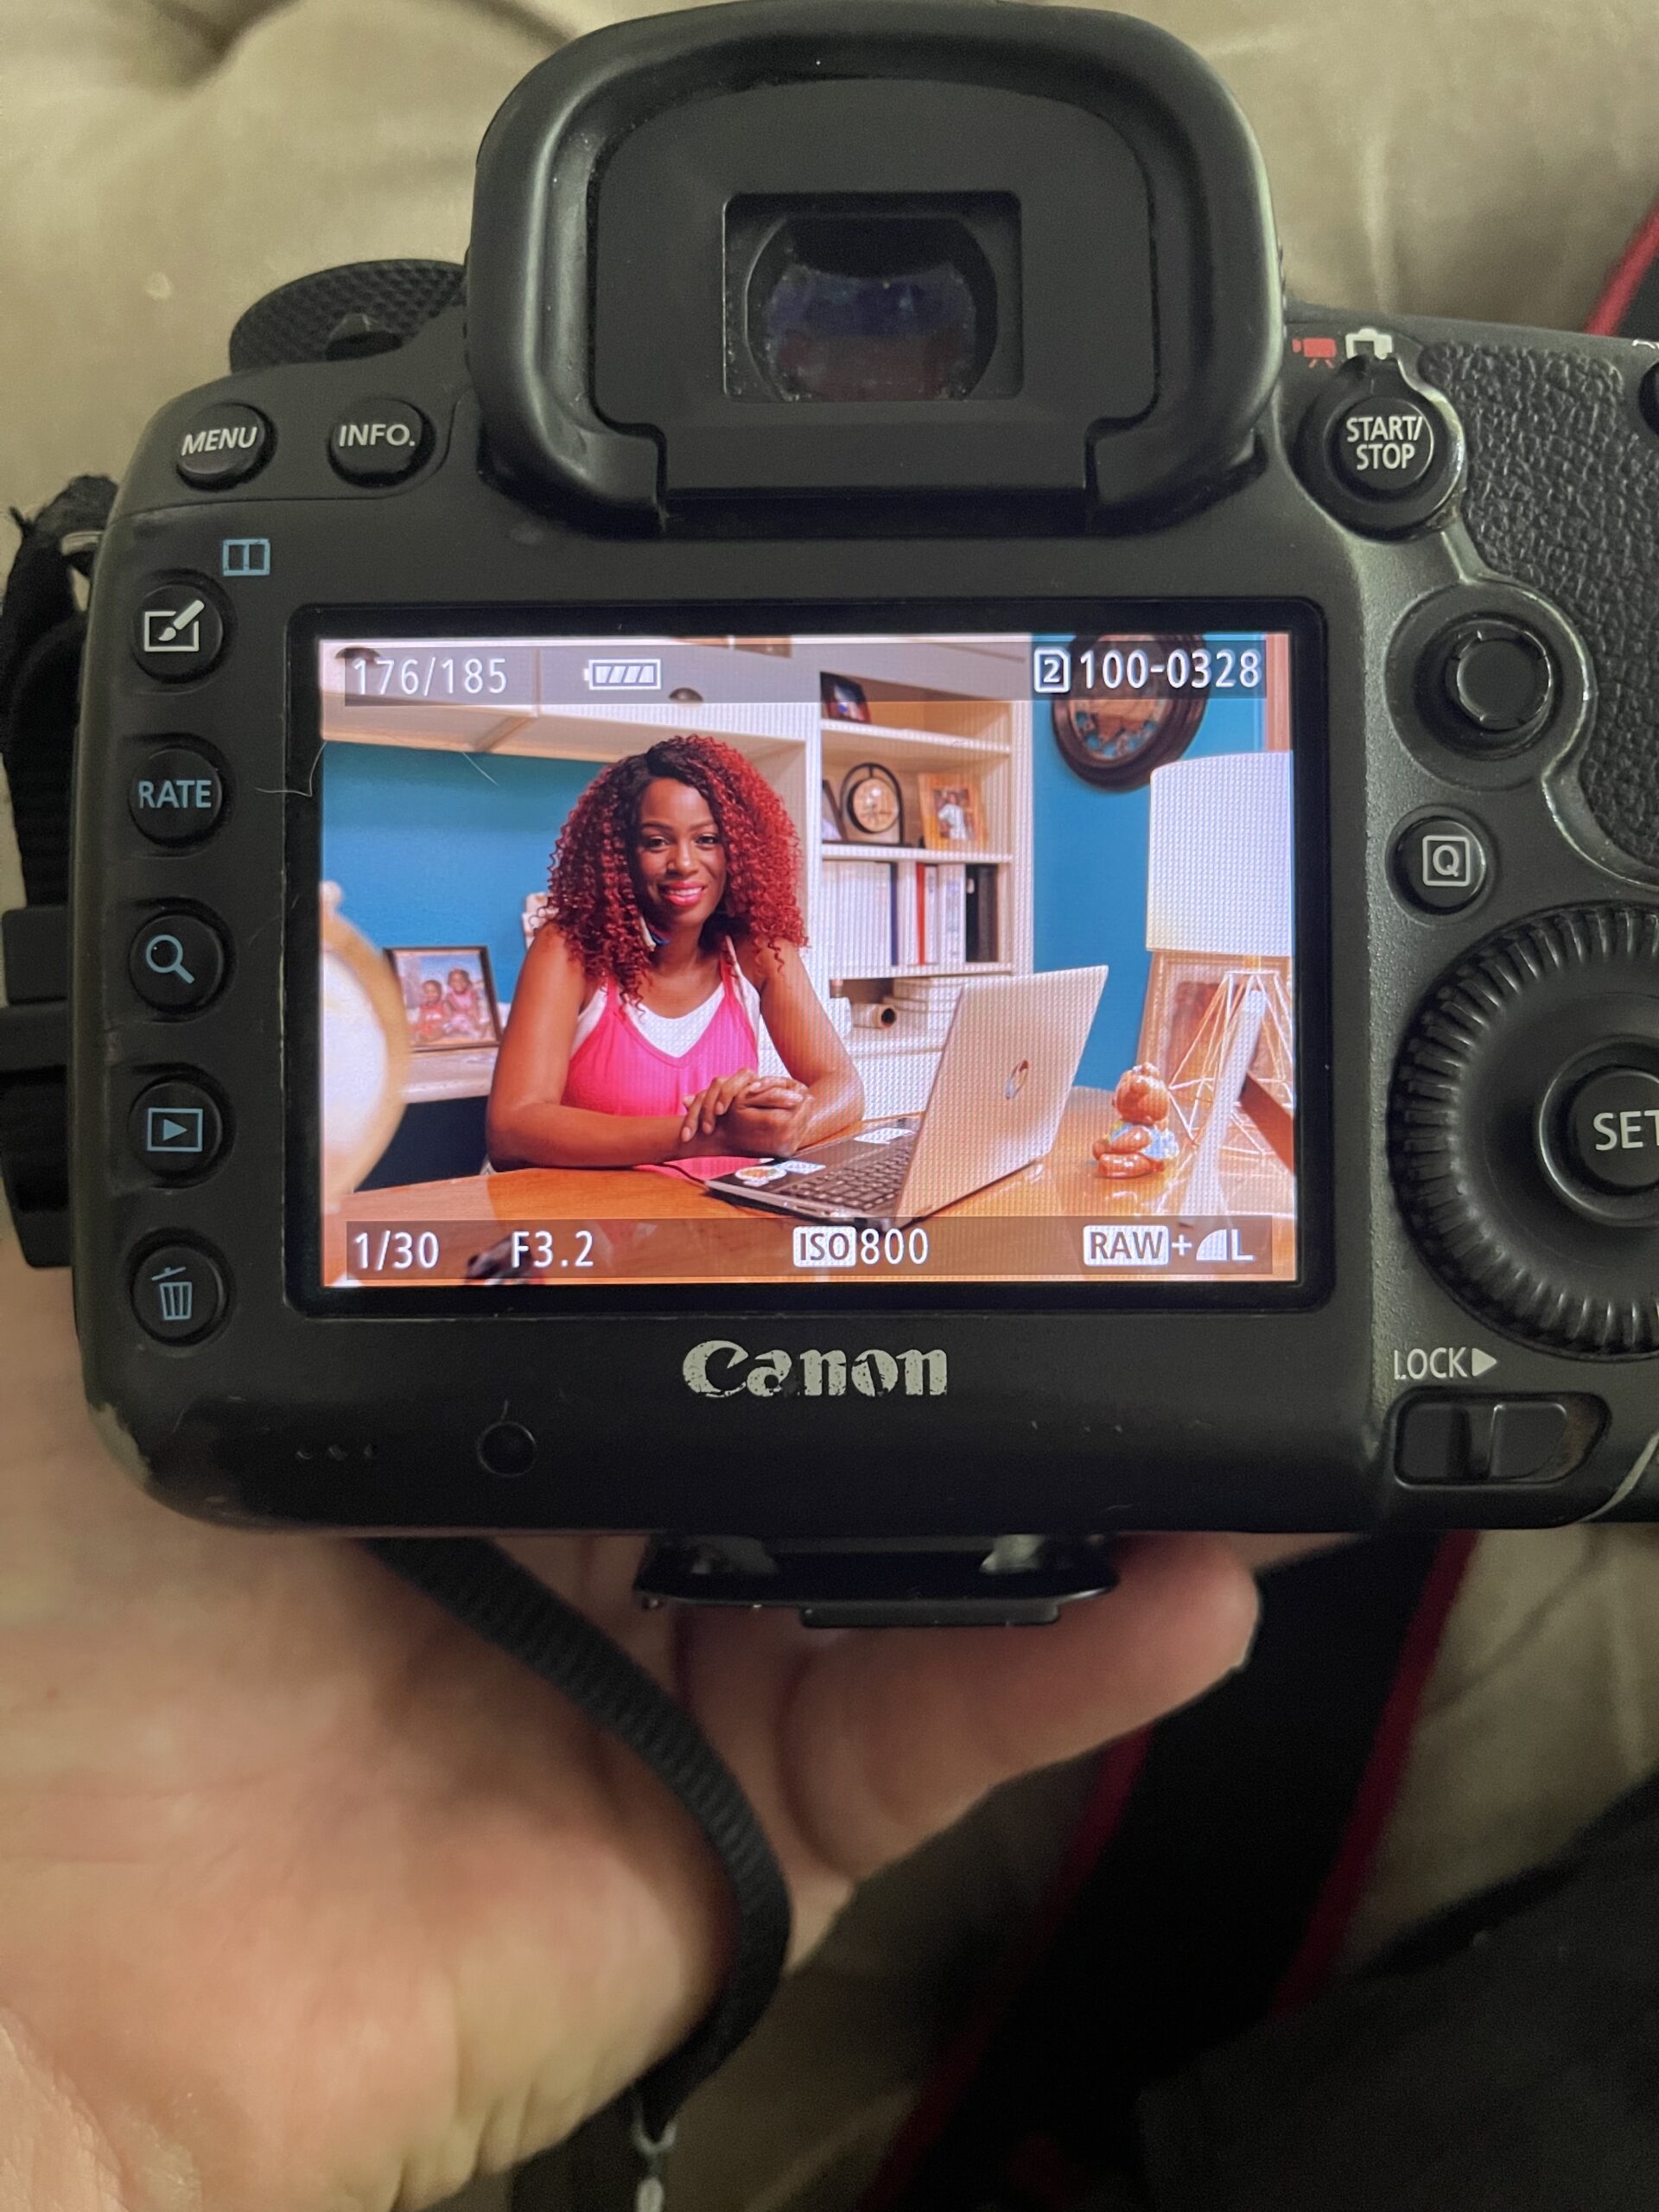 A Canon DSLR camera is held by the photographer, revealing the digital screen and controls. On the screen is a just-captured photo of Sherrell at her desk with a laptop, smiling directly at the camera.